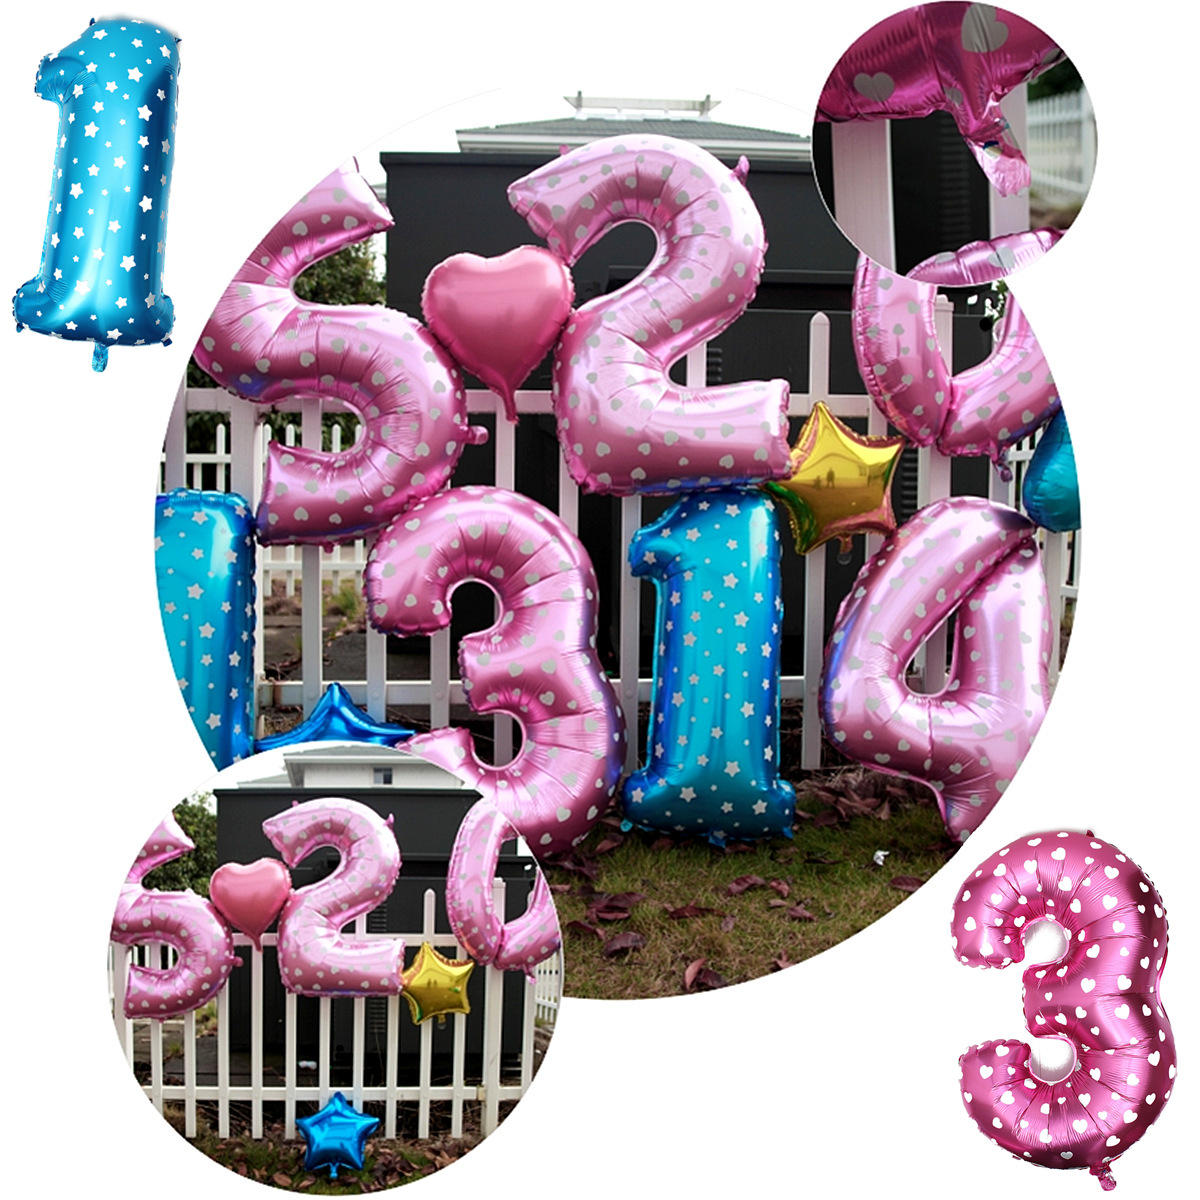 40 Inch Aluminum Foil Number Balloon Heart Shape Pattern Wedding Valentine Party Decoration